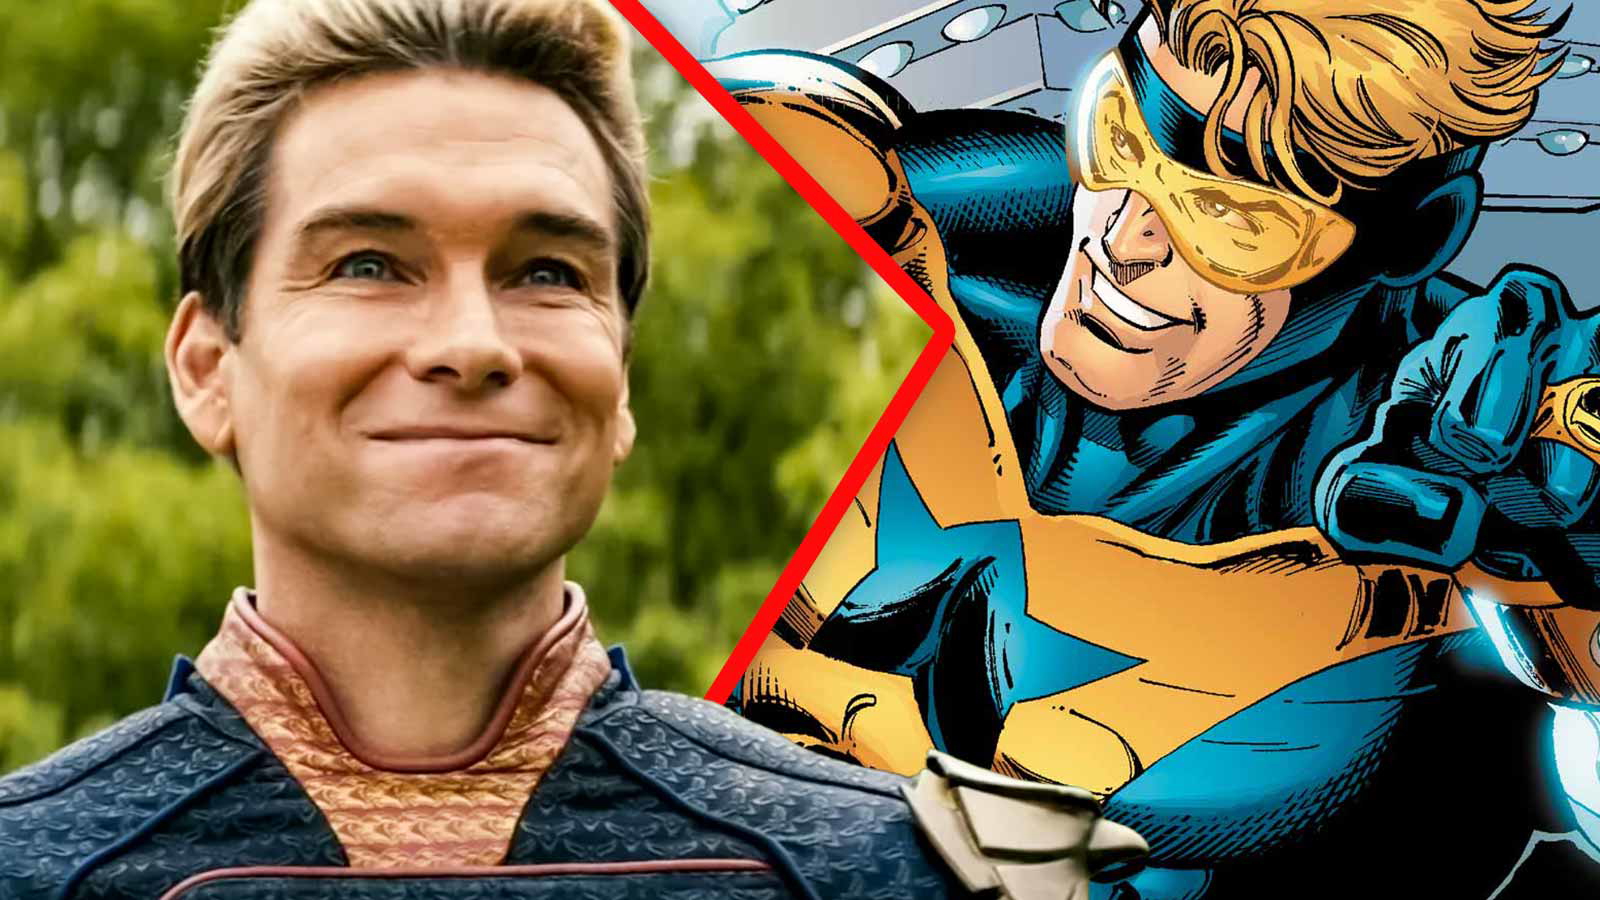 “My body doesn’t wanna do much action anymore”: Antony Starr Shatters The Boys Fans’ Dream of Watching Him Play Booster Gold in the DCU With a Brutally Honest Response